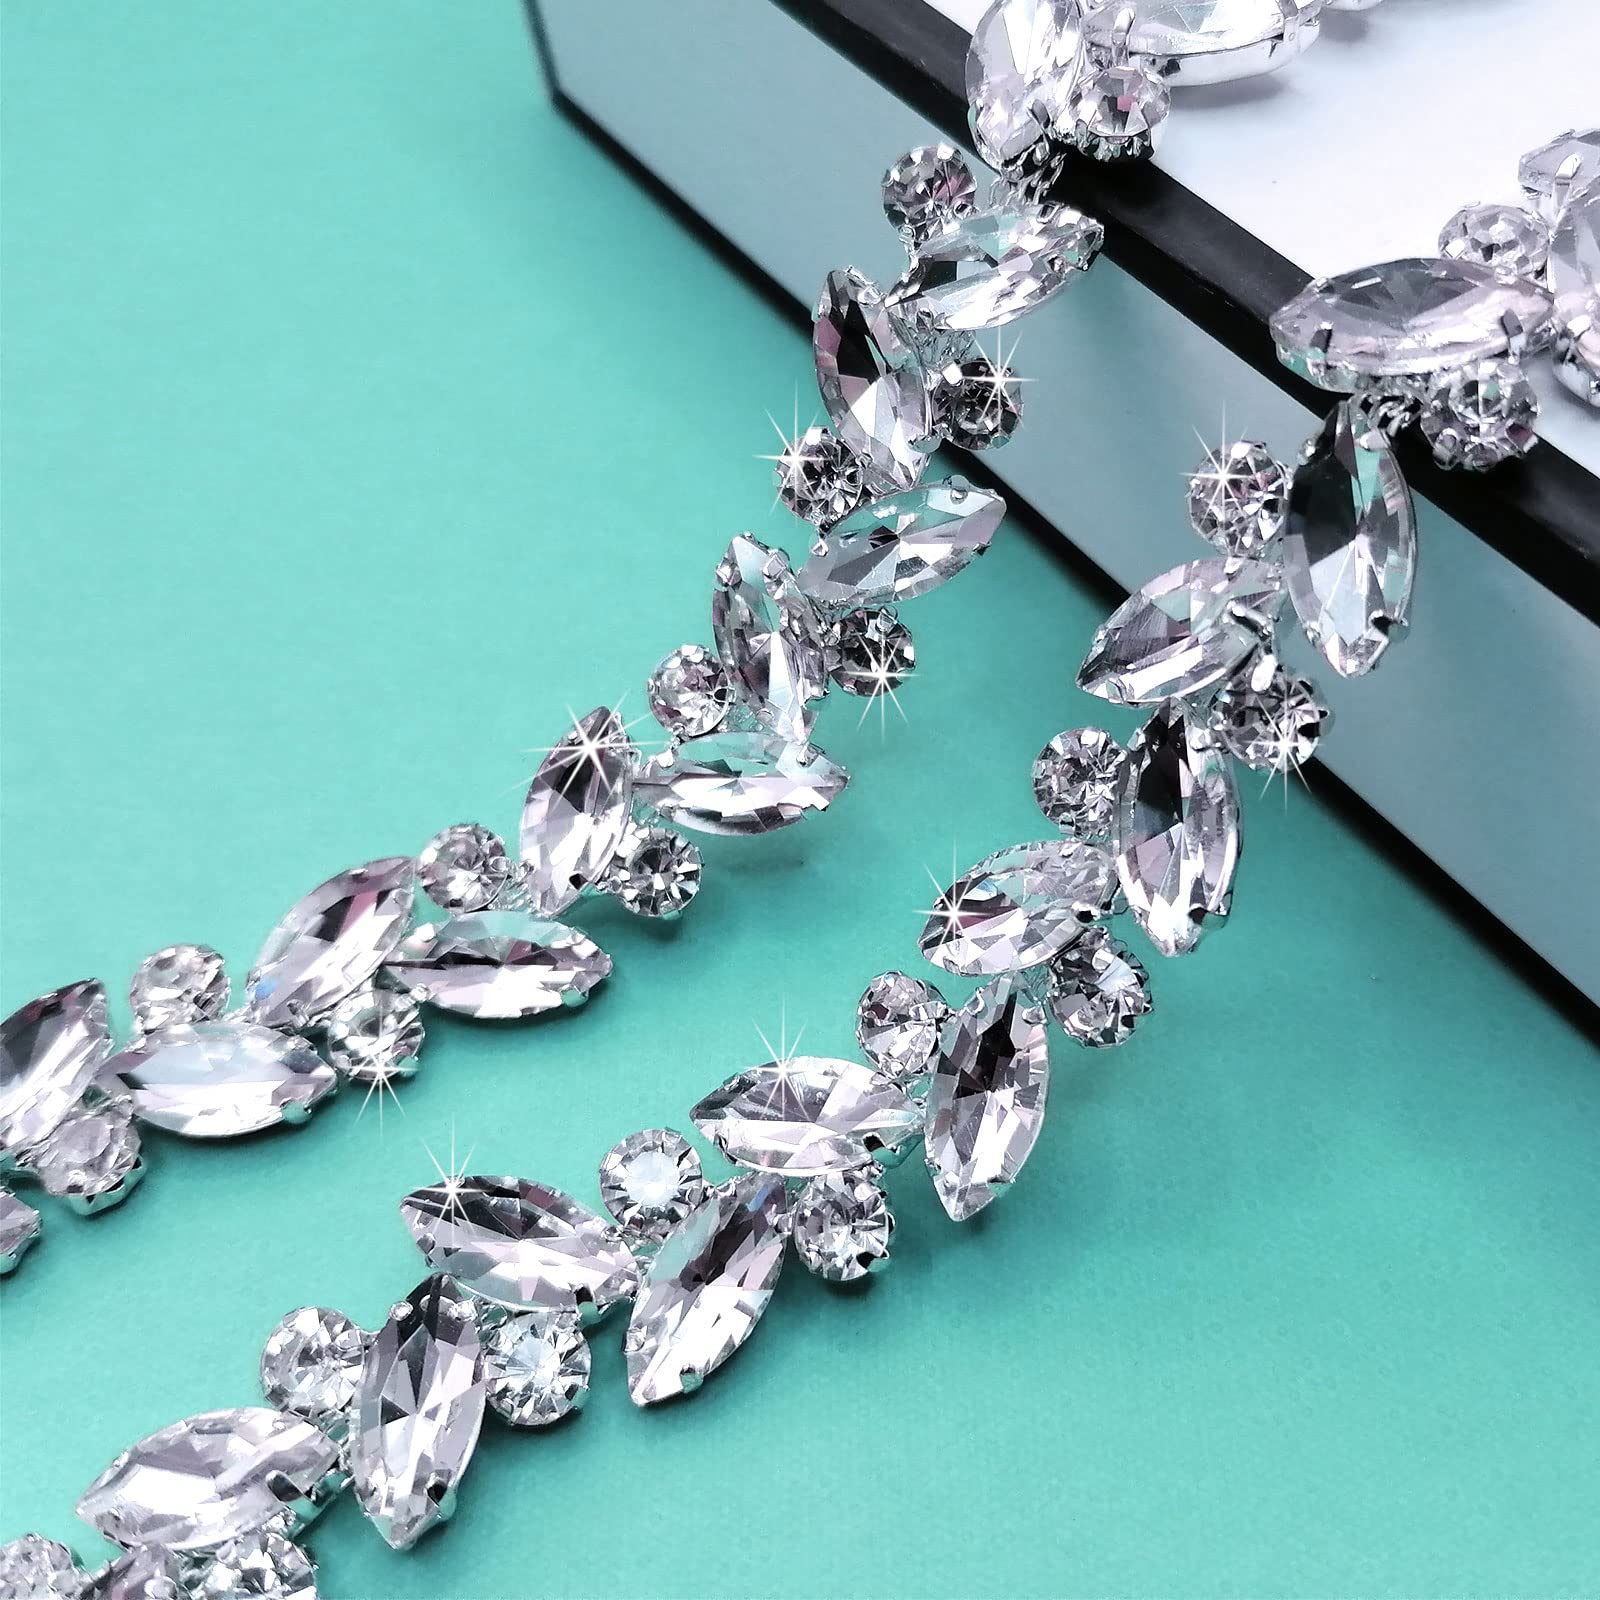 DUCRYSTAL 2mm/3mm Rhinestones Trim Crystal Glitter Stones Sewing  Rhinestones Chain for Dresses Decorations Trims Accessories - AliExpress